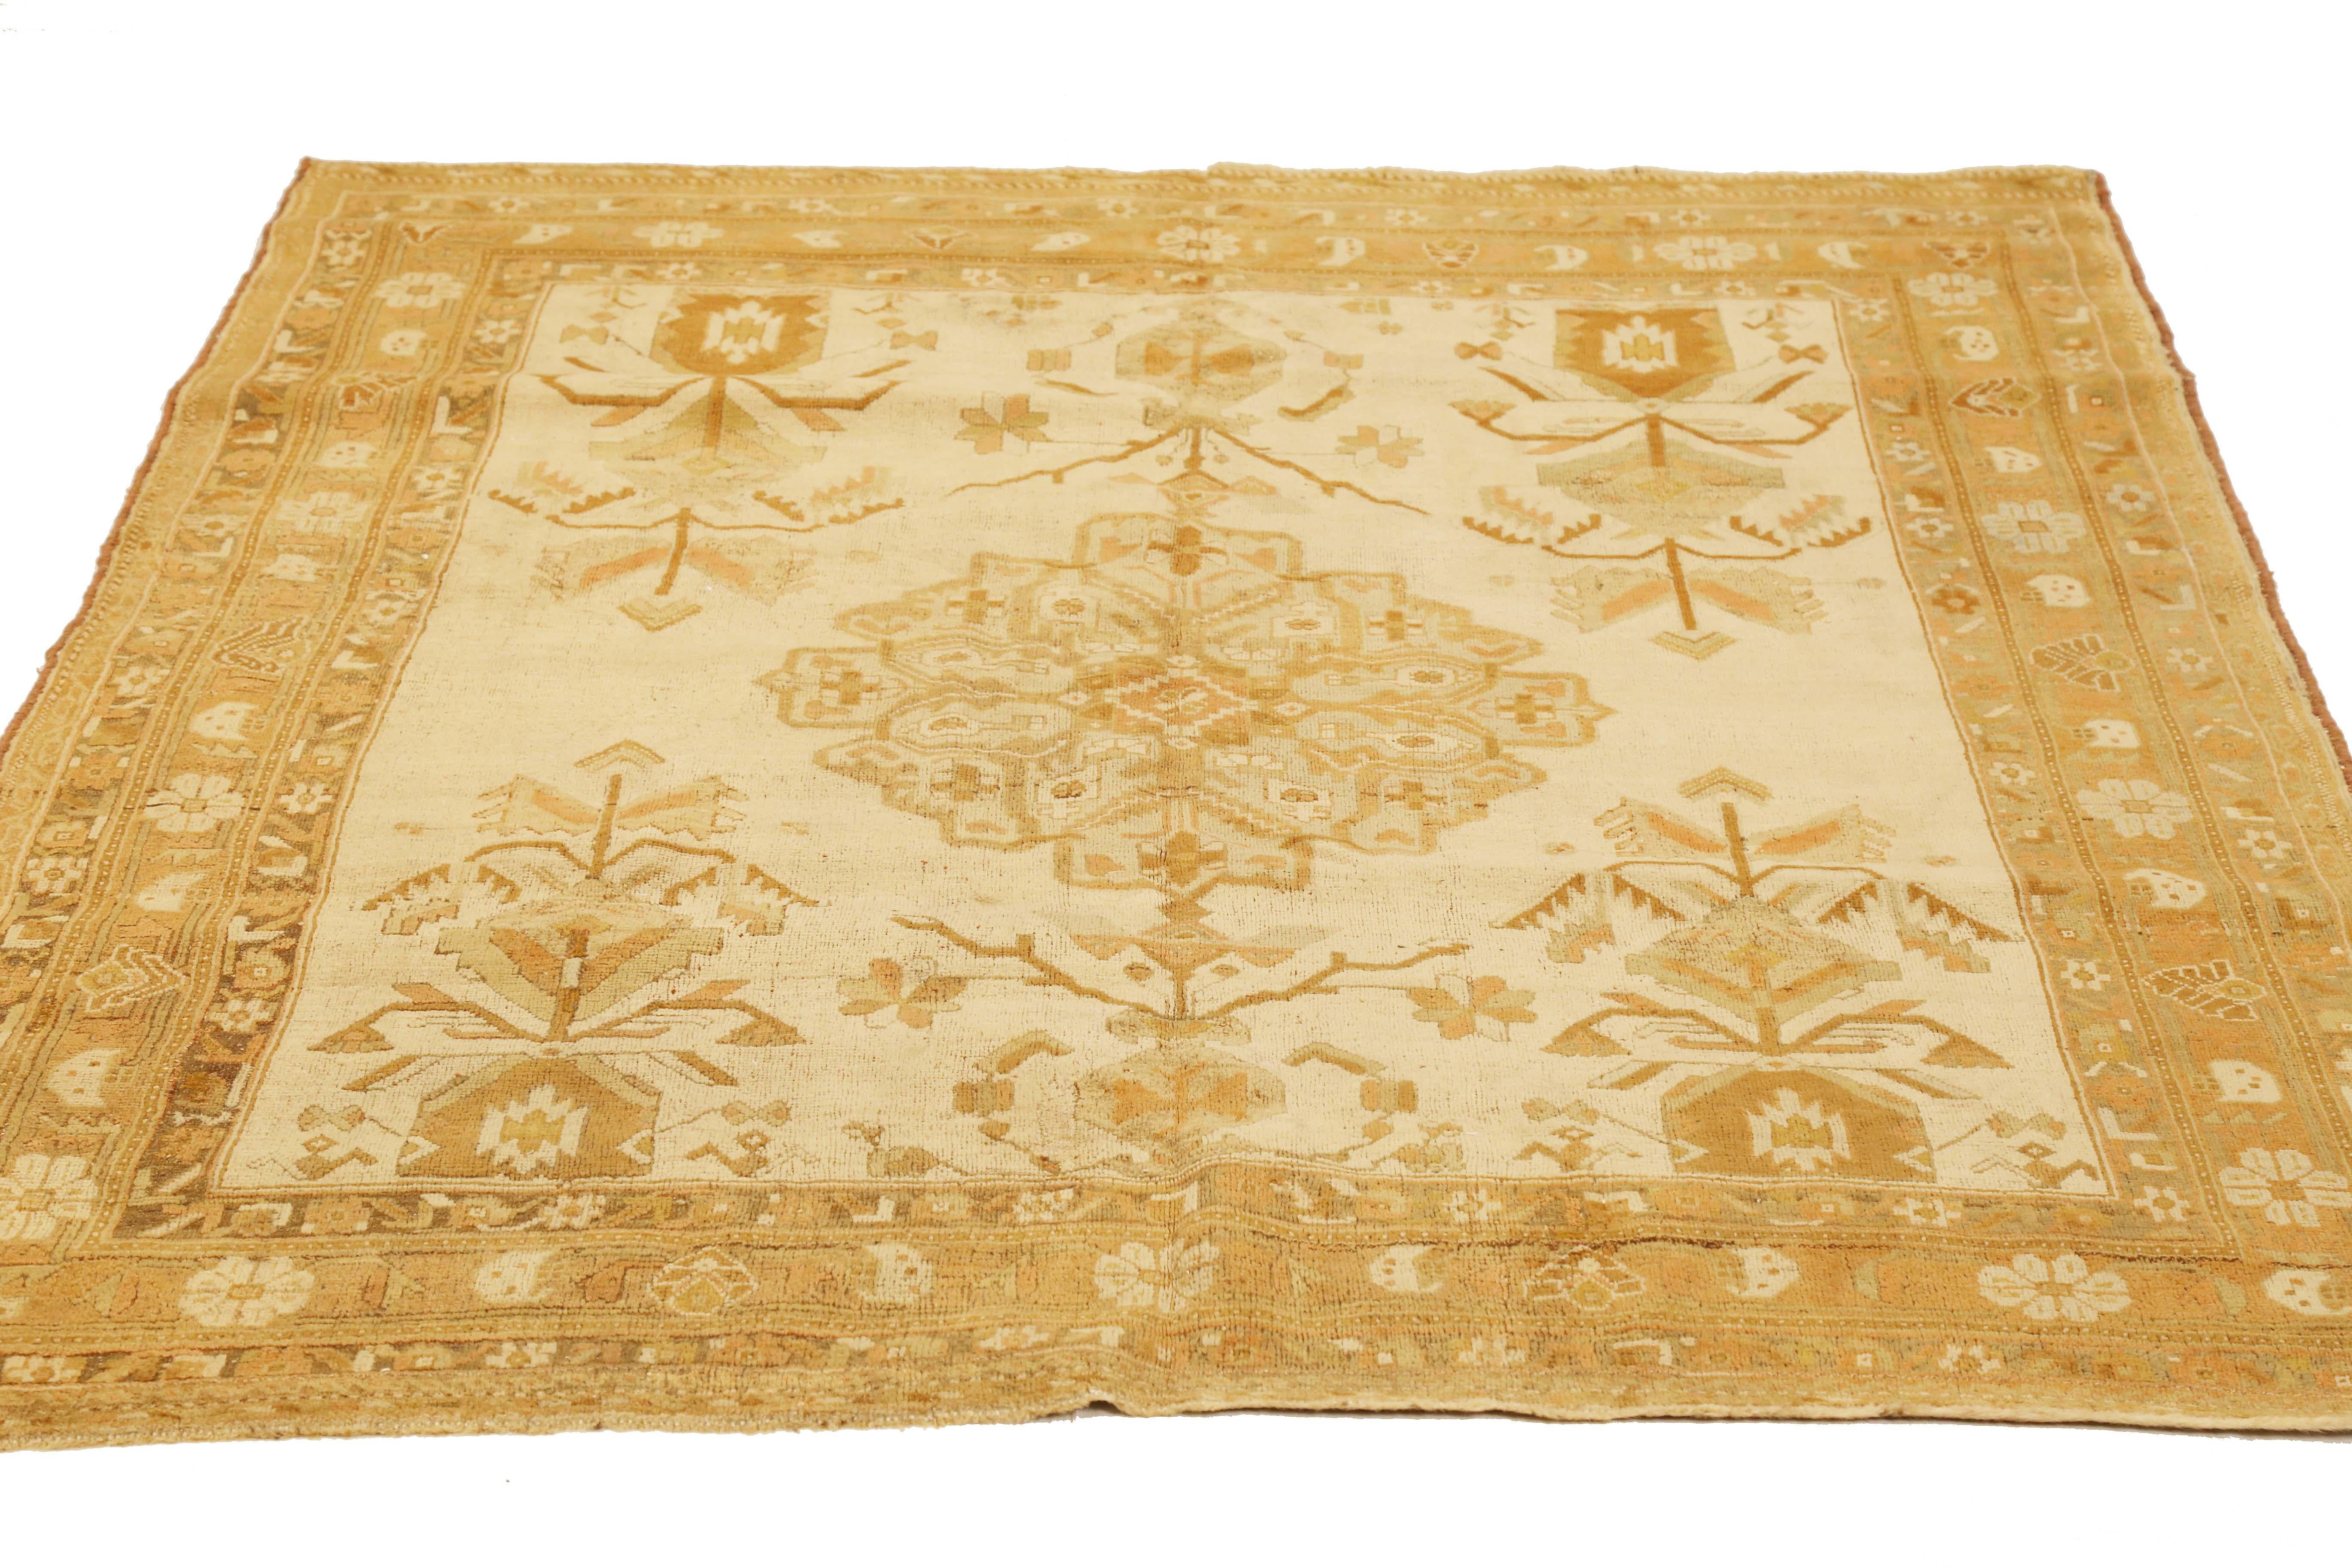 Antique Persian Sirjan rug handwoven from the finest sheep’s wool and colored with all-natural vegetable dyes that are safe for humans and pets. It’s a traditional Sirjan design featuring floral details in brown and beige over an ivory field. It’s